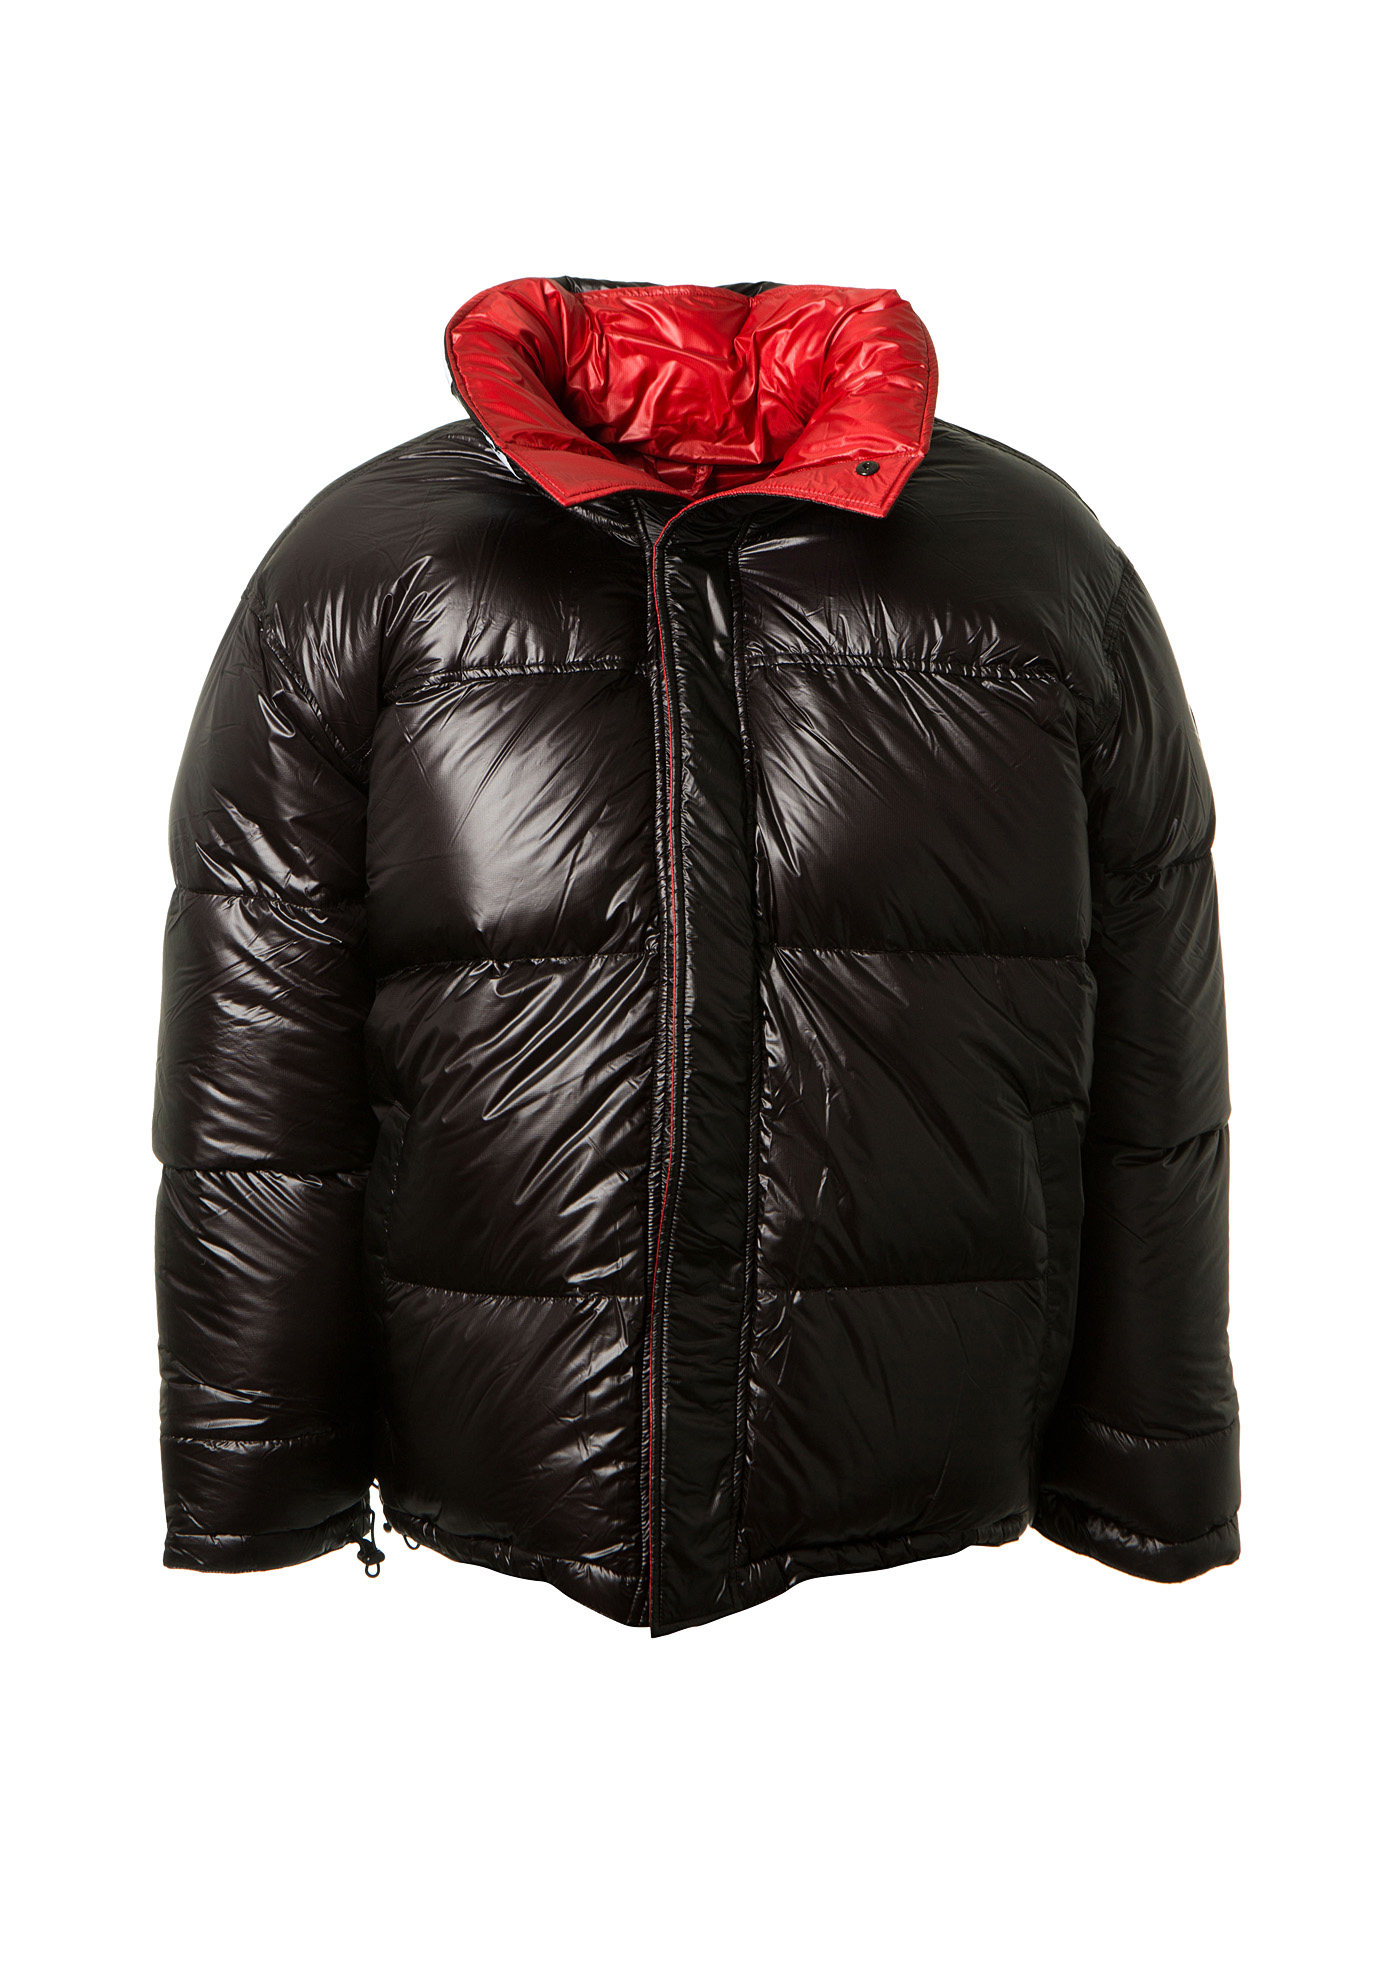 Vetements X Canada Goose Black And Red Reversible Down Jacket | ModeSens